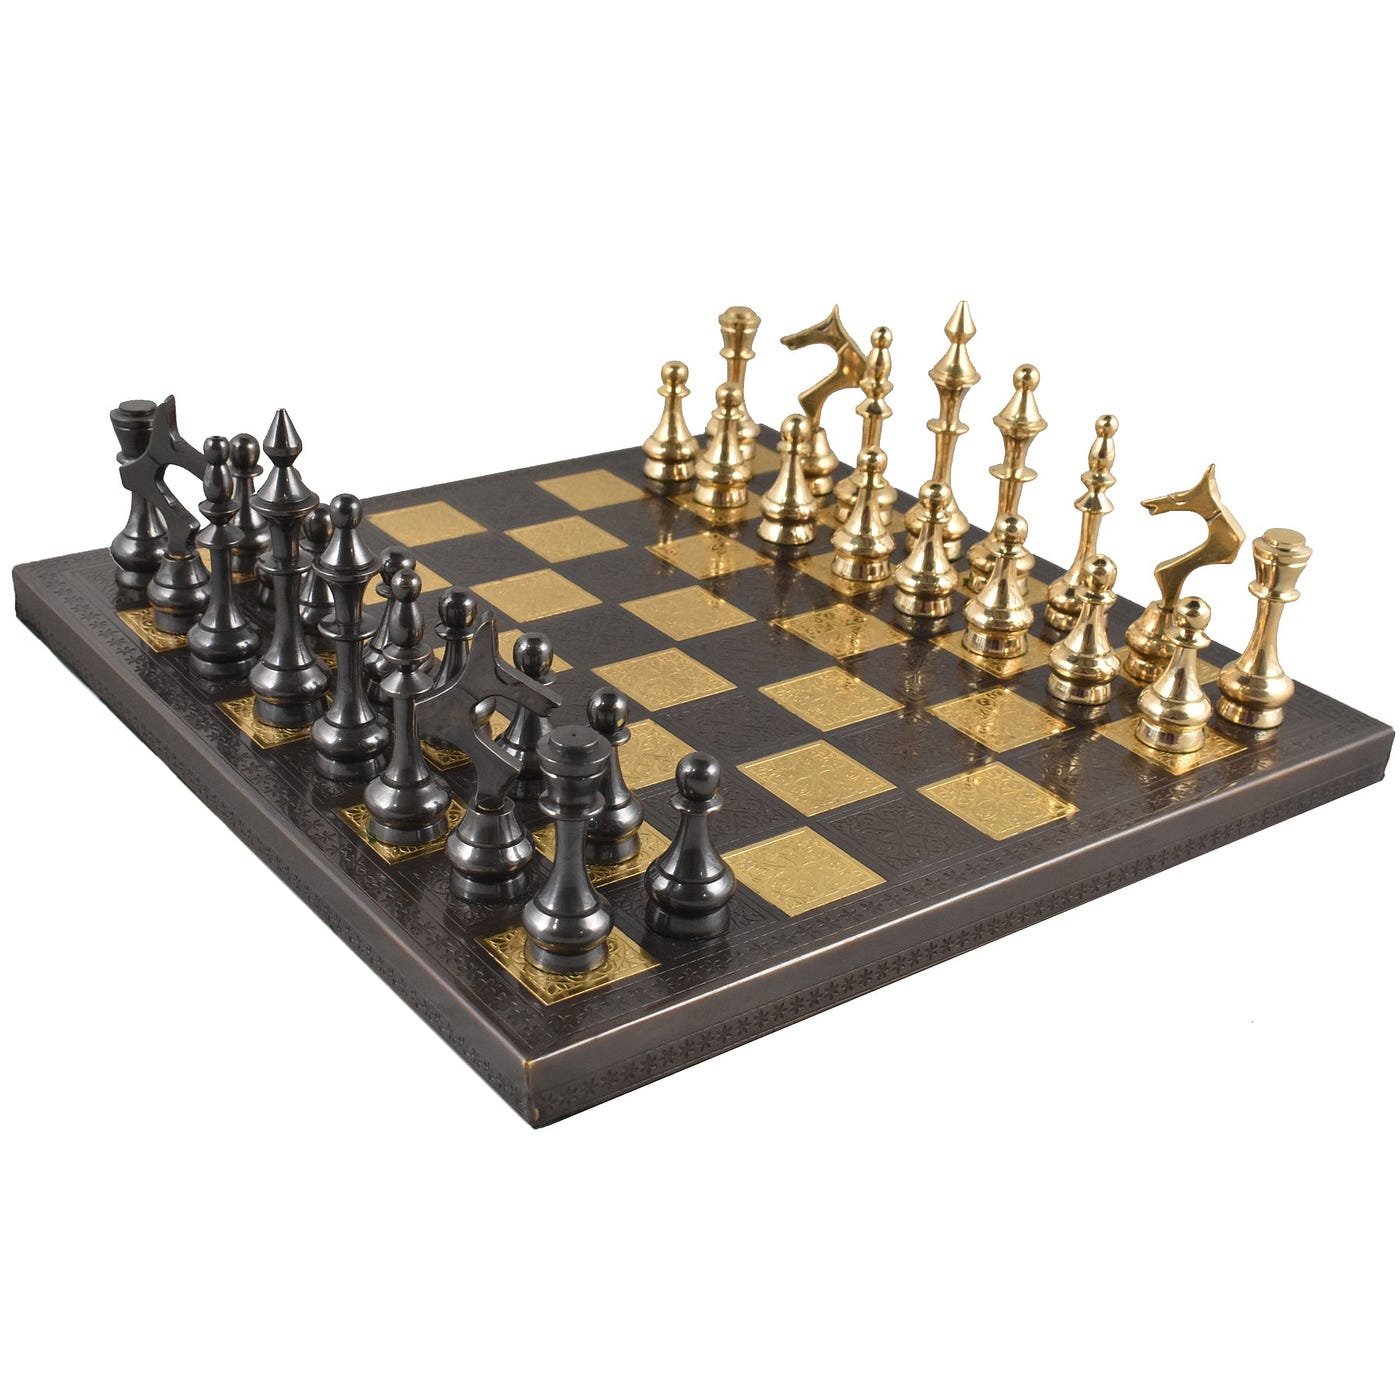 How To Set Up a Chess Board? - Royal Chess Mall